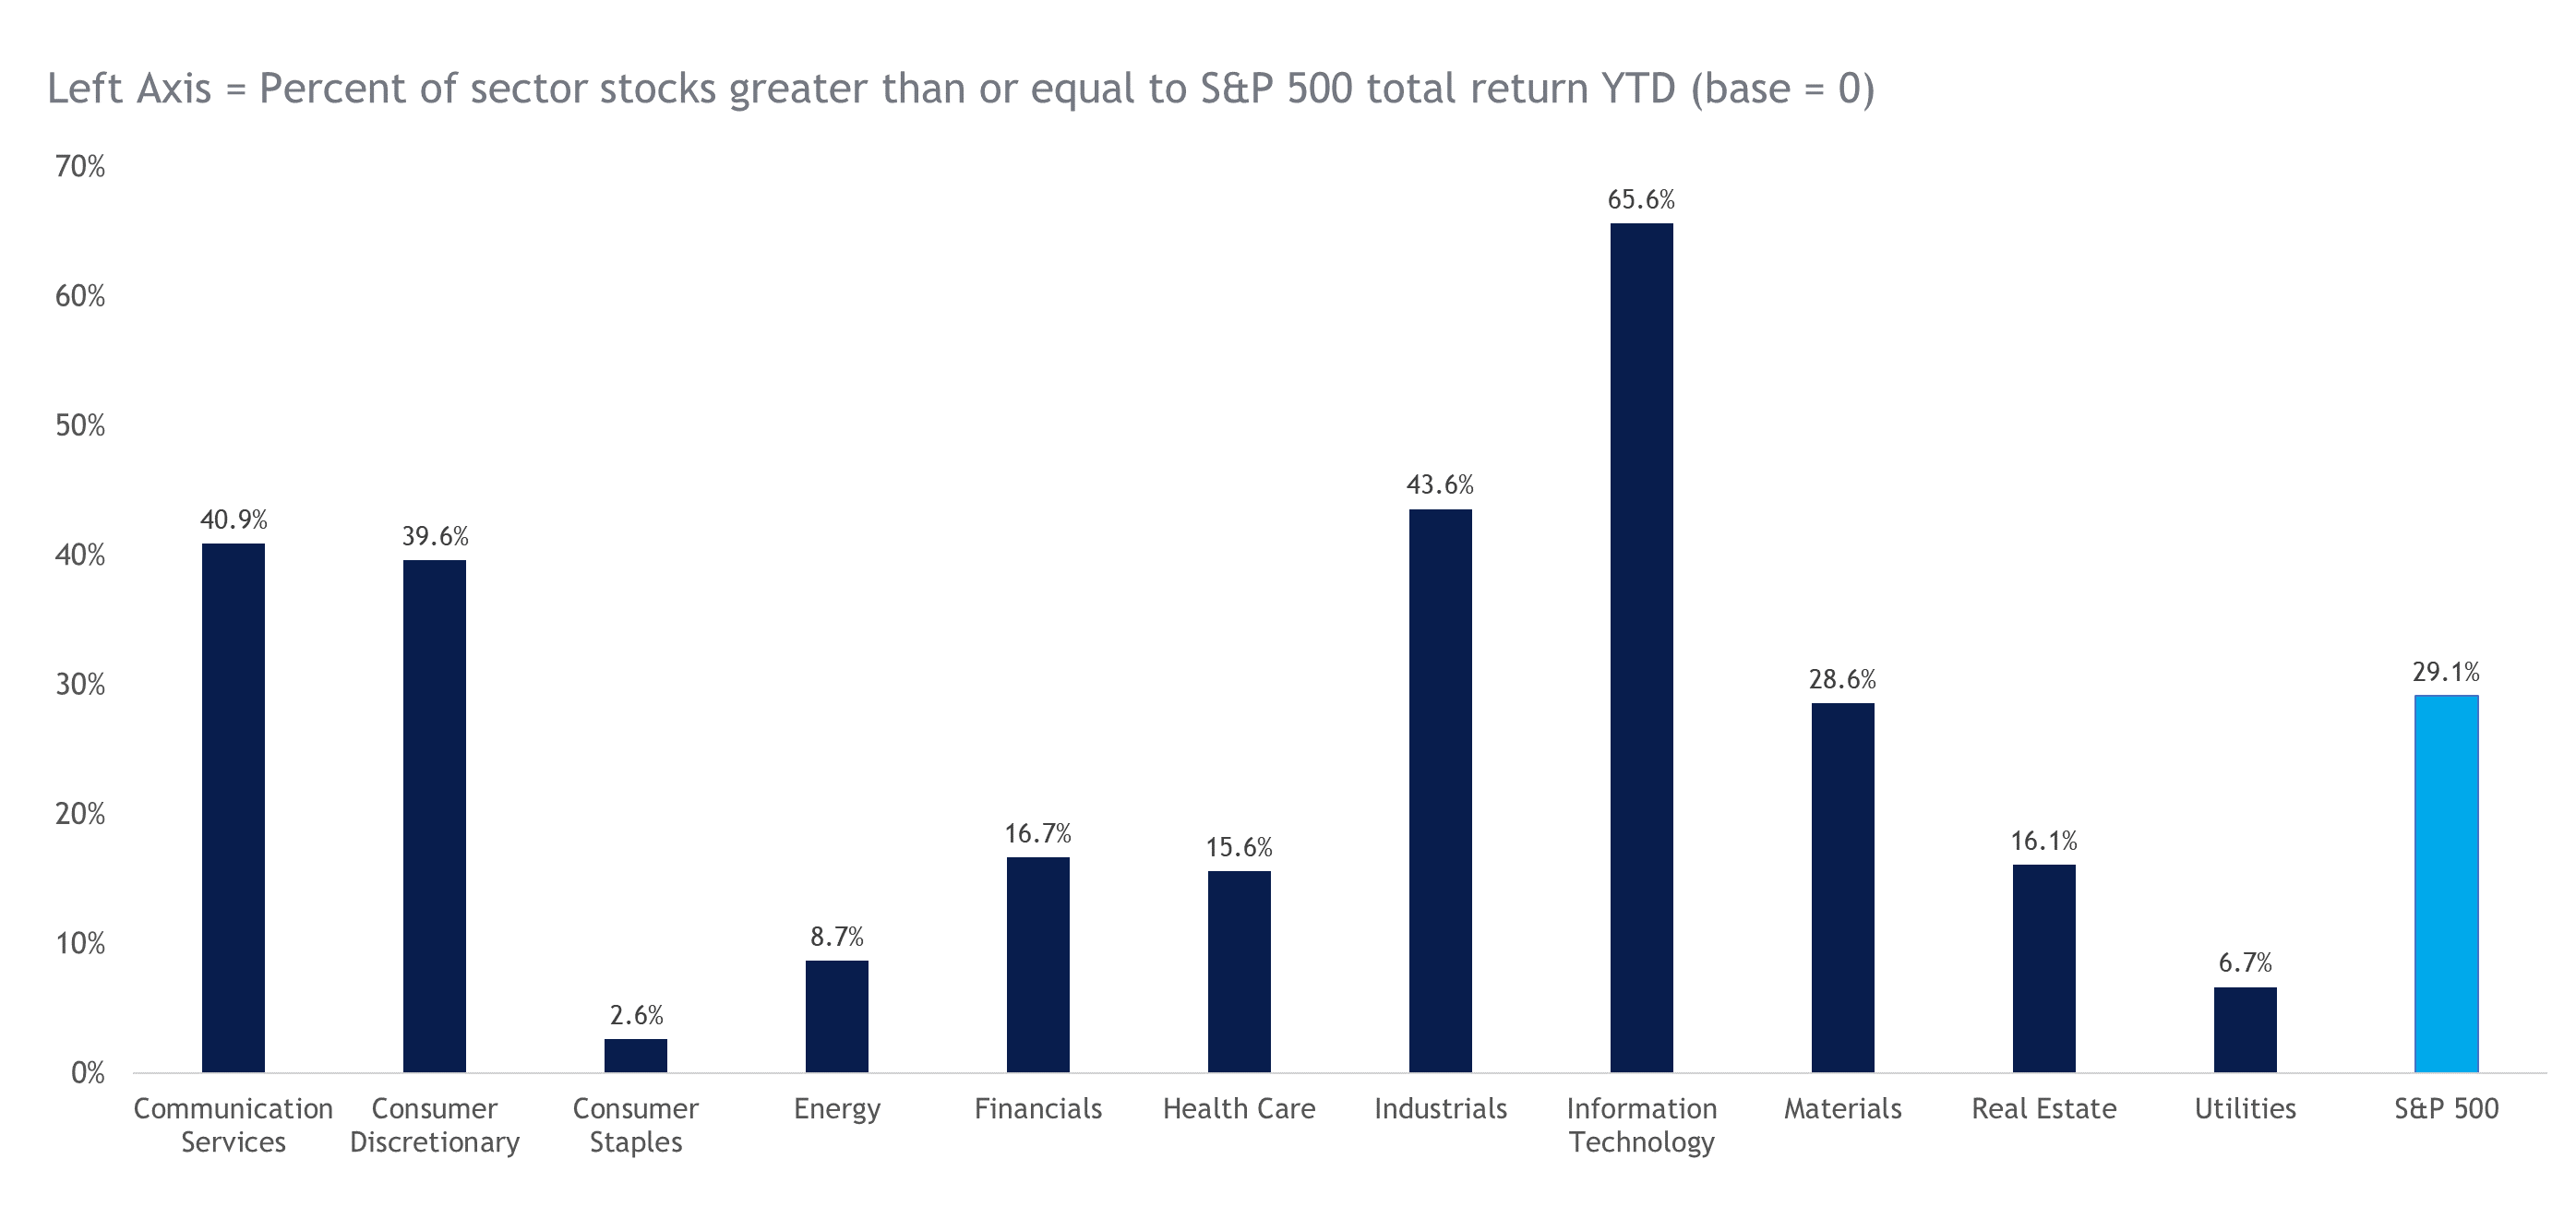 Bar graph of S&P 500 sectors depicting percentage of sectors greater than or equal to S&P 500 total return year to date as described in preceding paragraph.